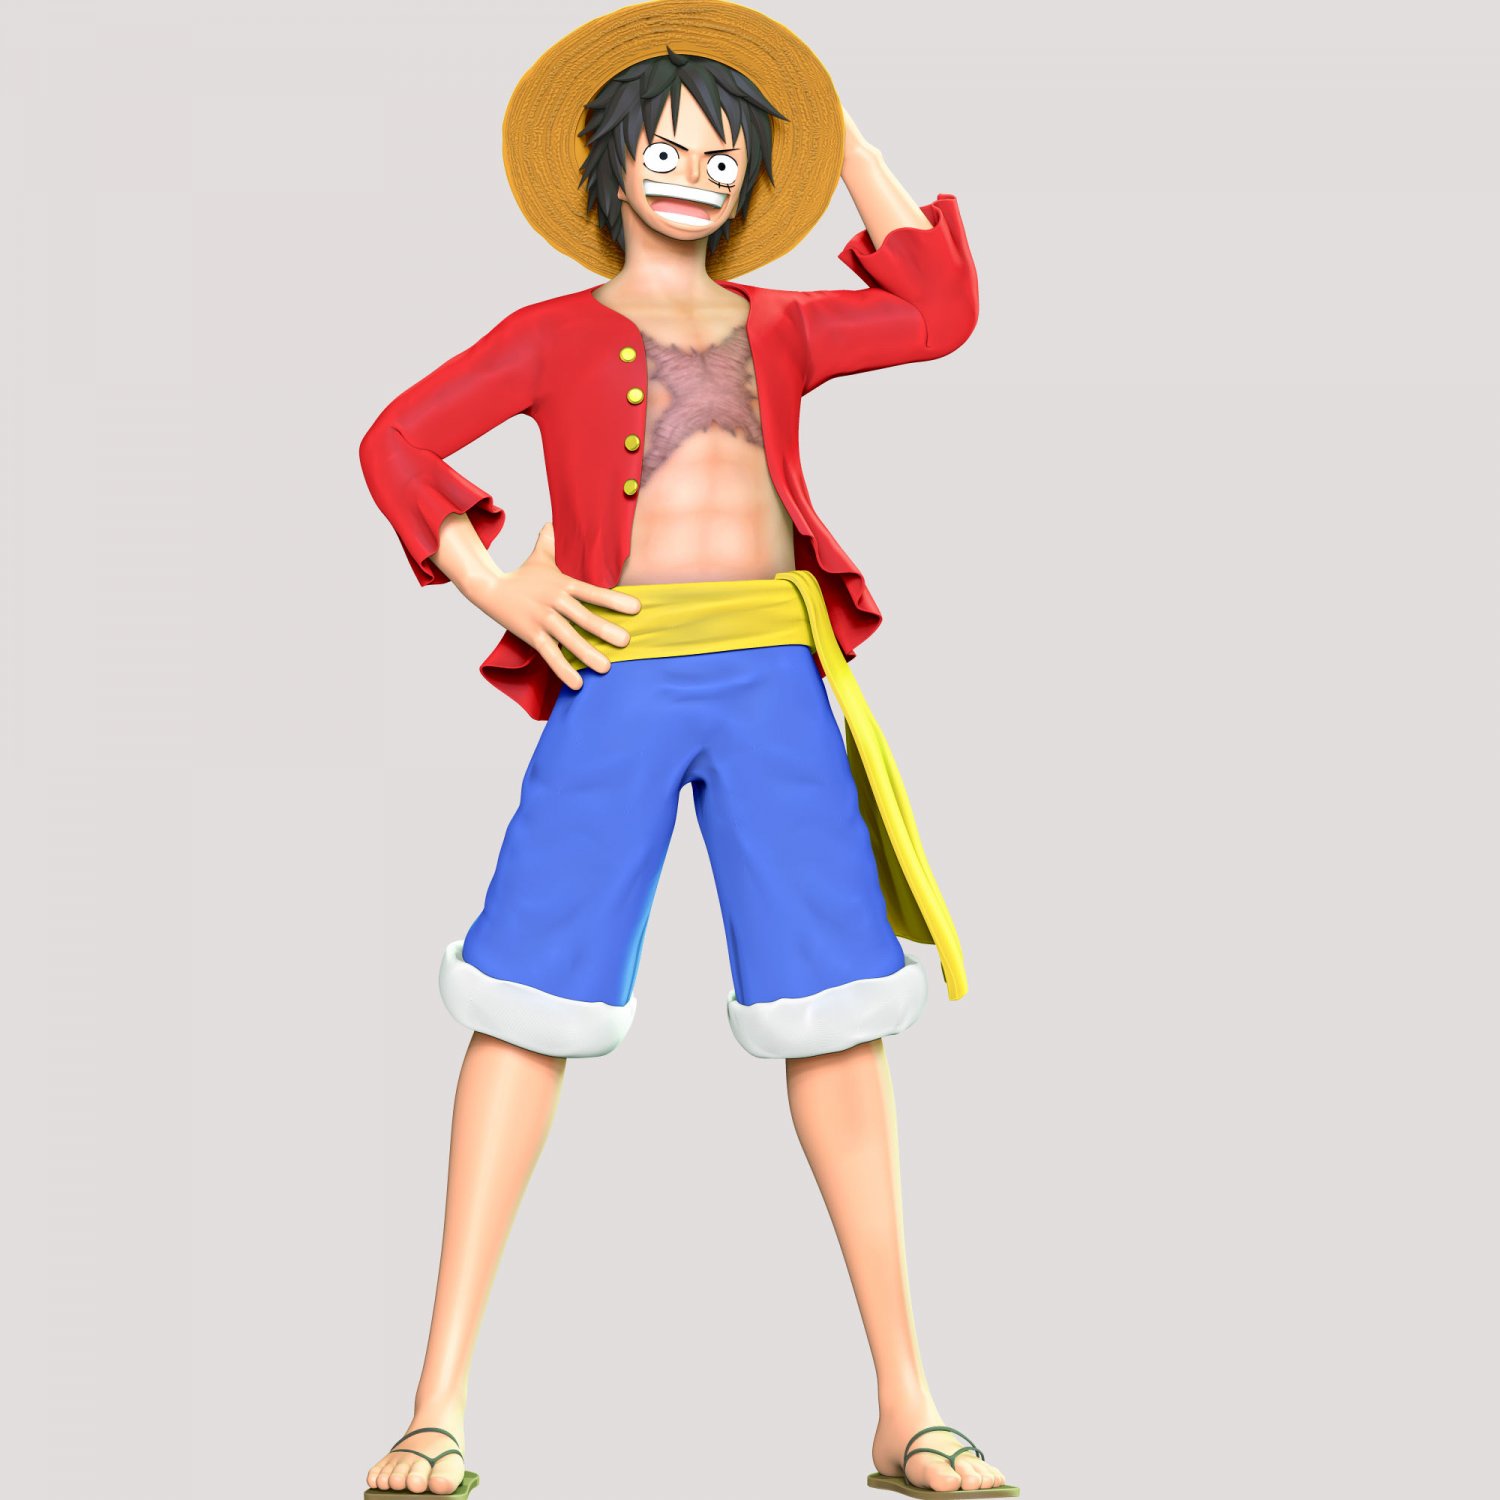 125 One Piece Luffy Gear Images, Stock Photos, 3D objects